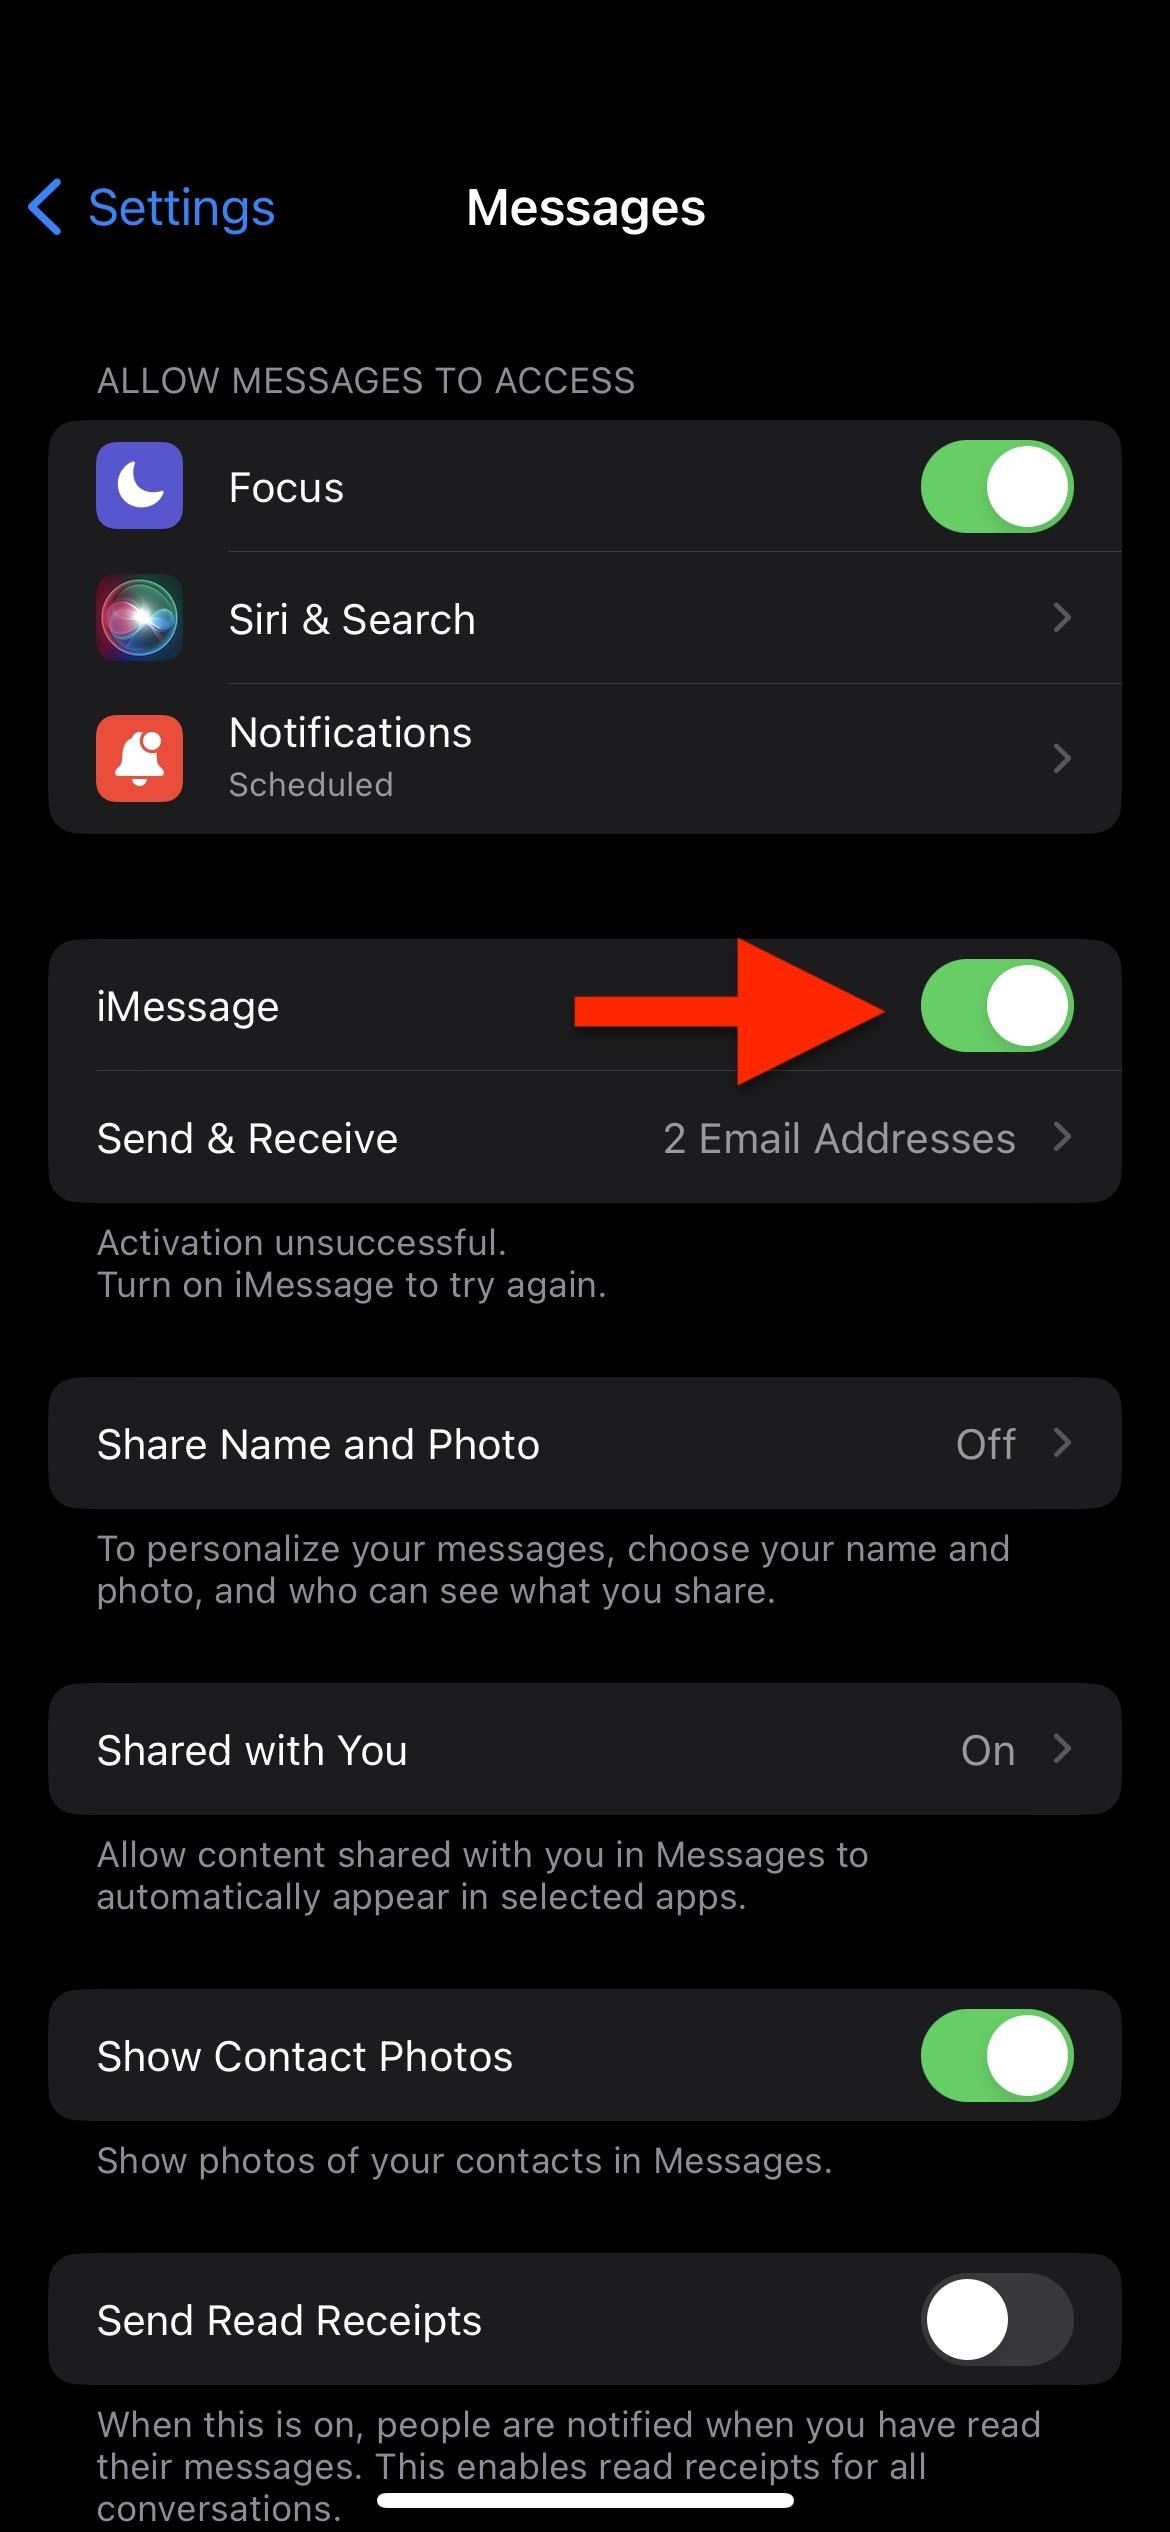 How to Keep Other iMessage Users from Editing or Taking Back the Messages They Send to You